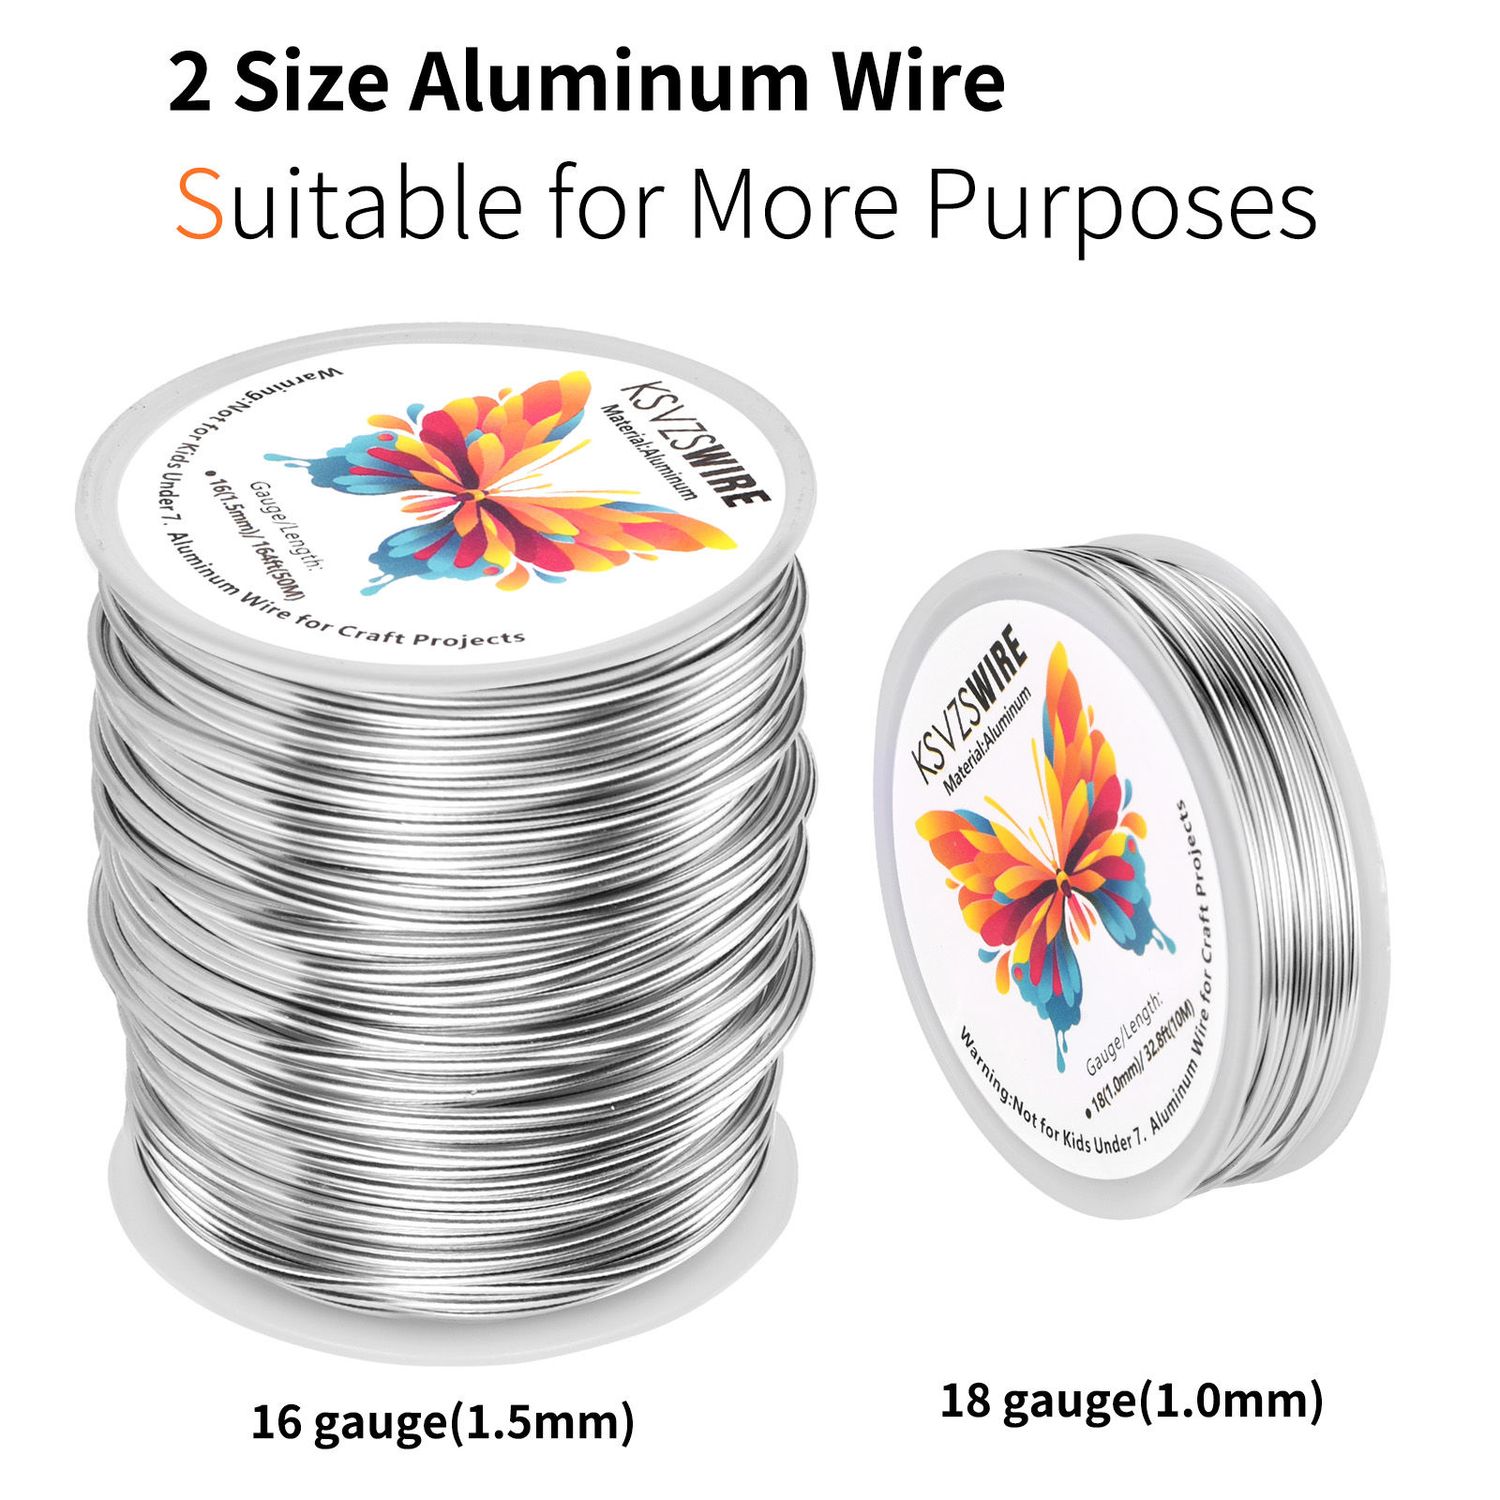 1mm Aluminum Craft Wire, 50M/164ft Bendable Jewellery Thin Wire